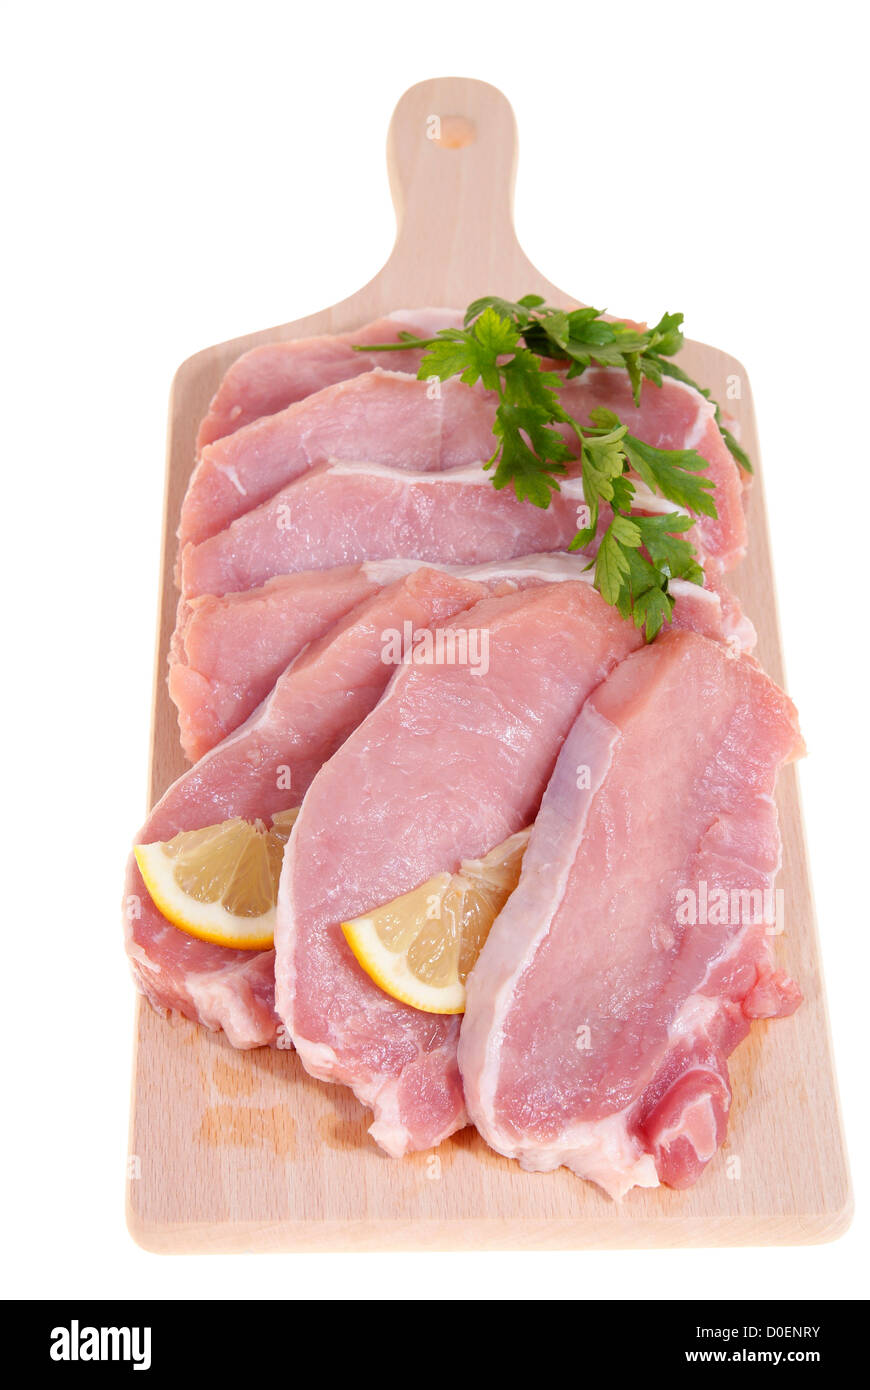 part of pork loin on desk-board isolated on white background Stock Photo